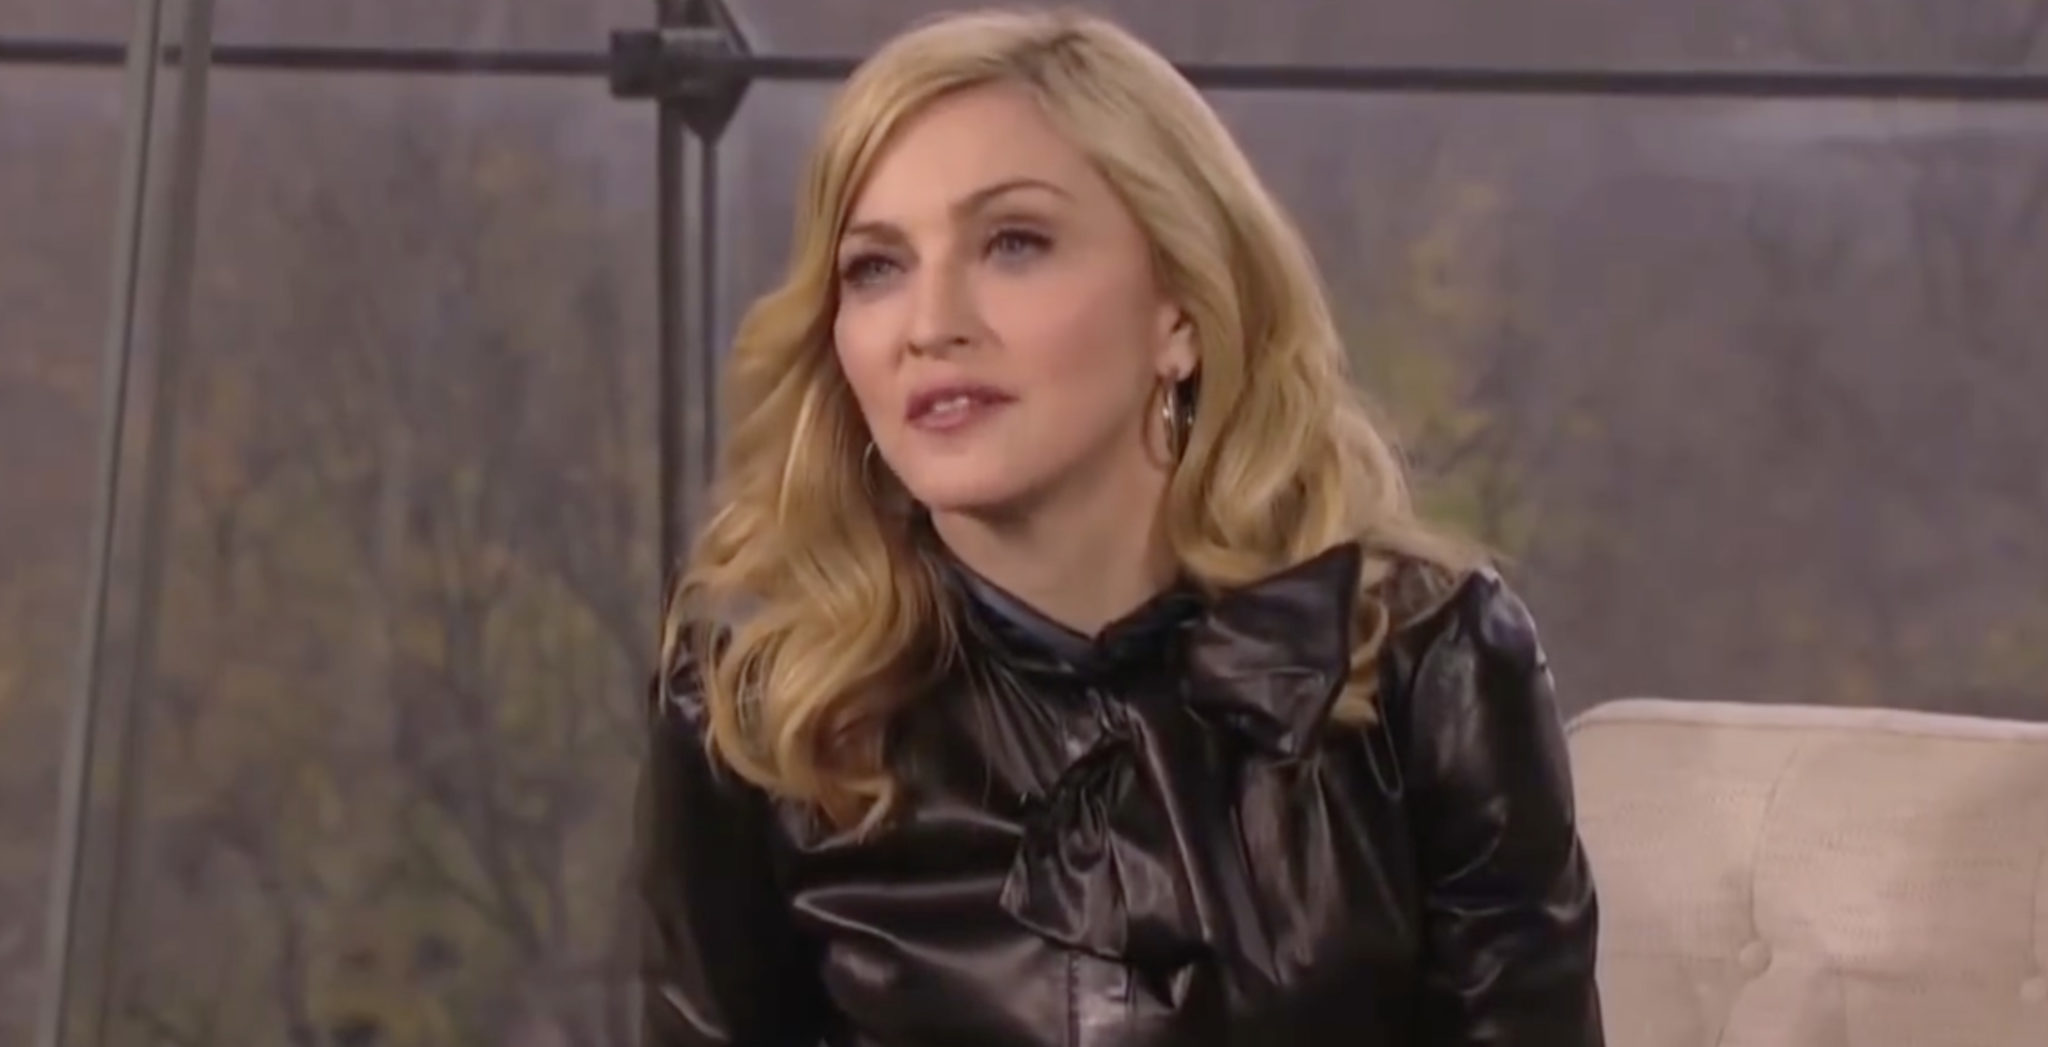 Watch! Video! The best advice Madonna could give someone